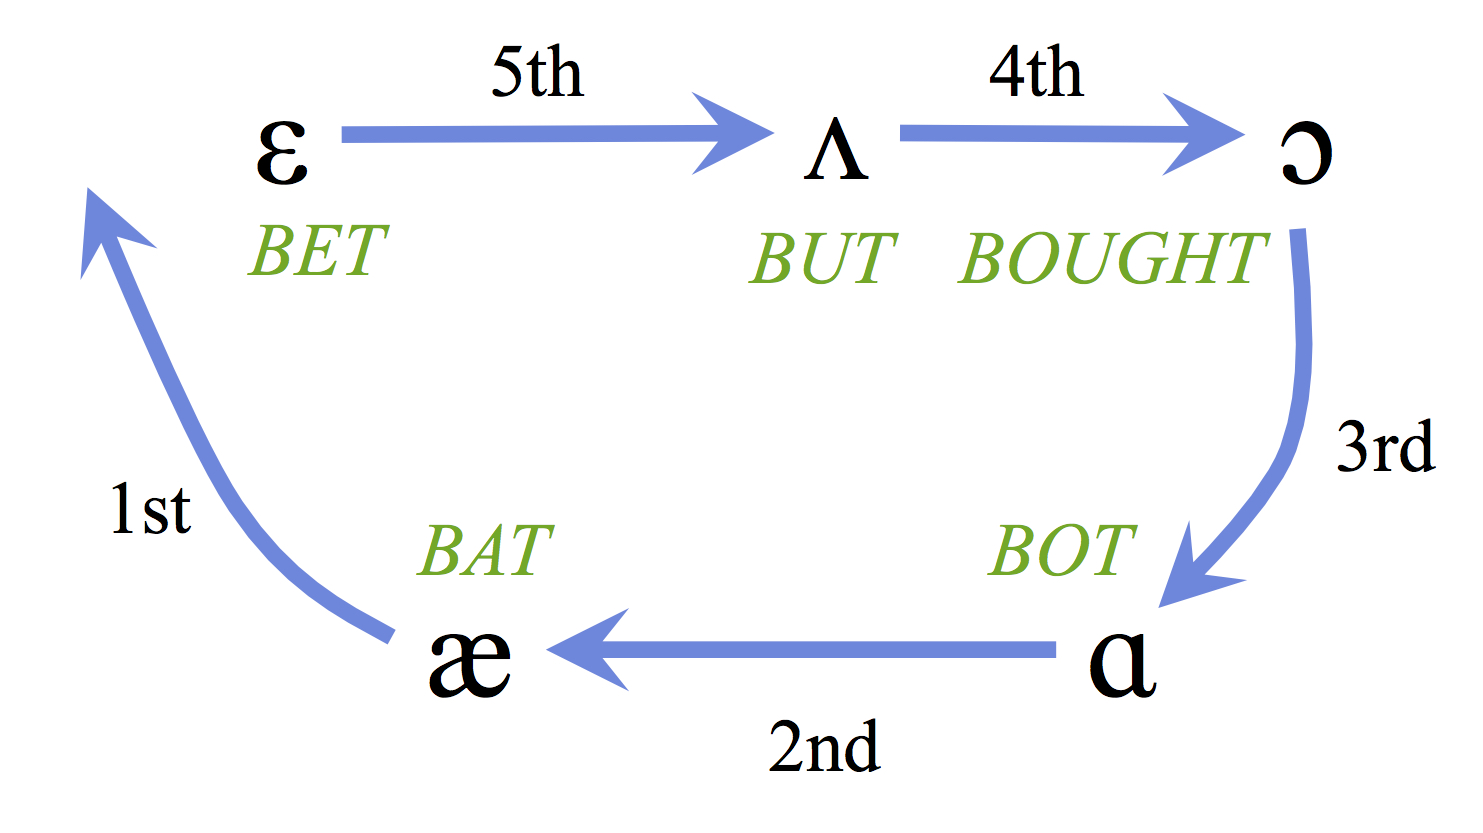 Depiction of the Northern Cities Chain shift. The vowel in BAT moves up first, followed by the advancement of BOT, then the lowering of BOUGHT, then the backing of BUT, and the backing of BET